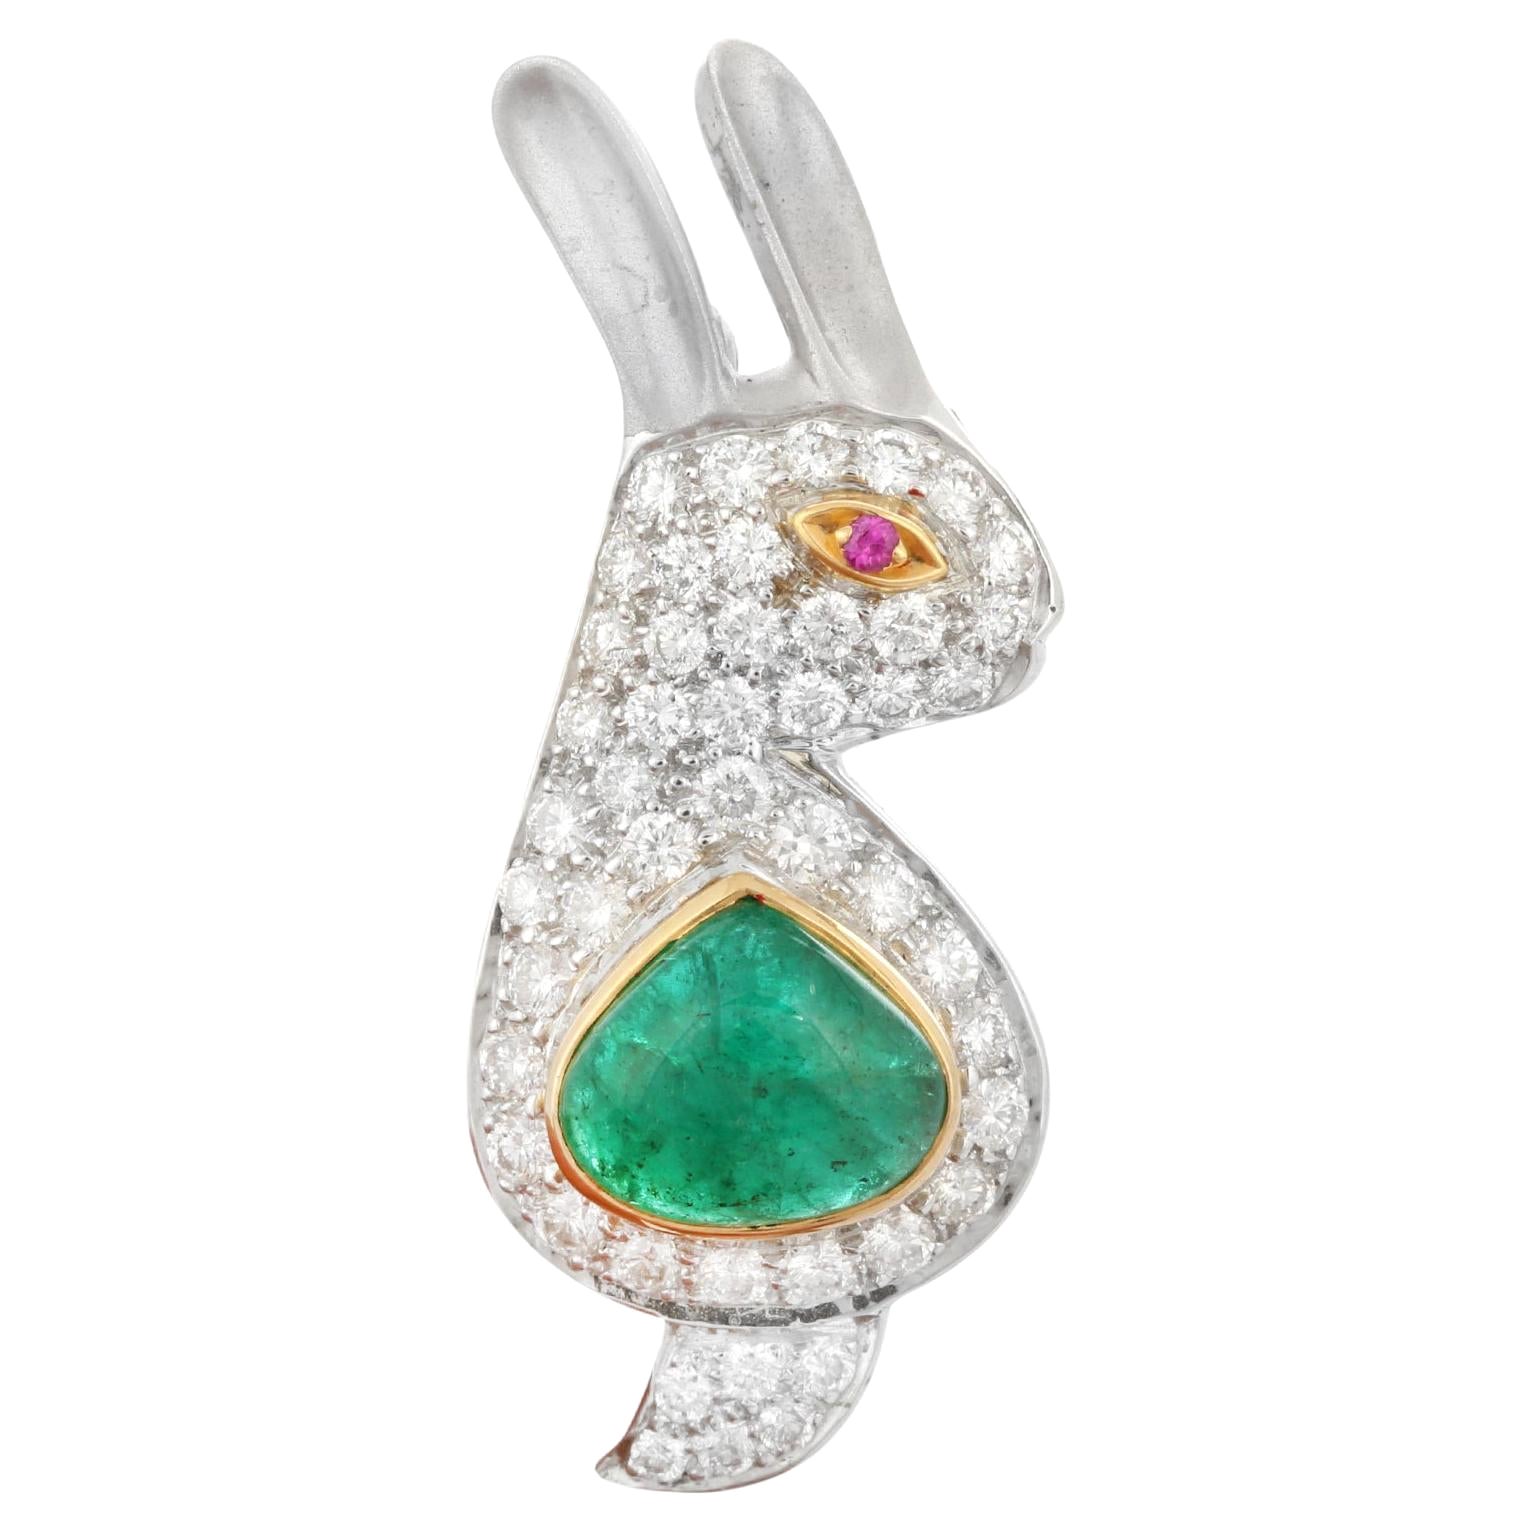 2.2 Carat Emerald Diamond Rabbit Brooch in 18k Solid White Gold, Unisex Gifts For Sale